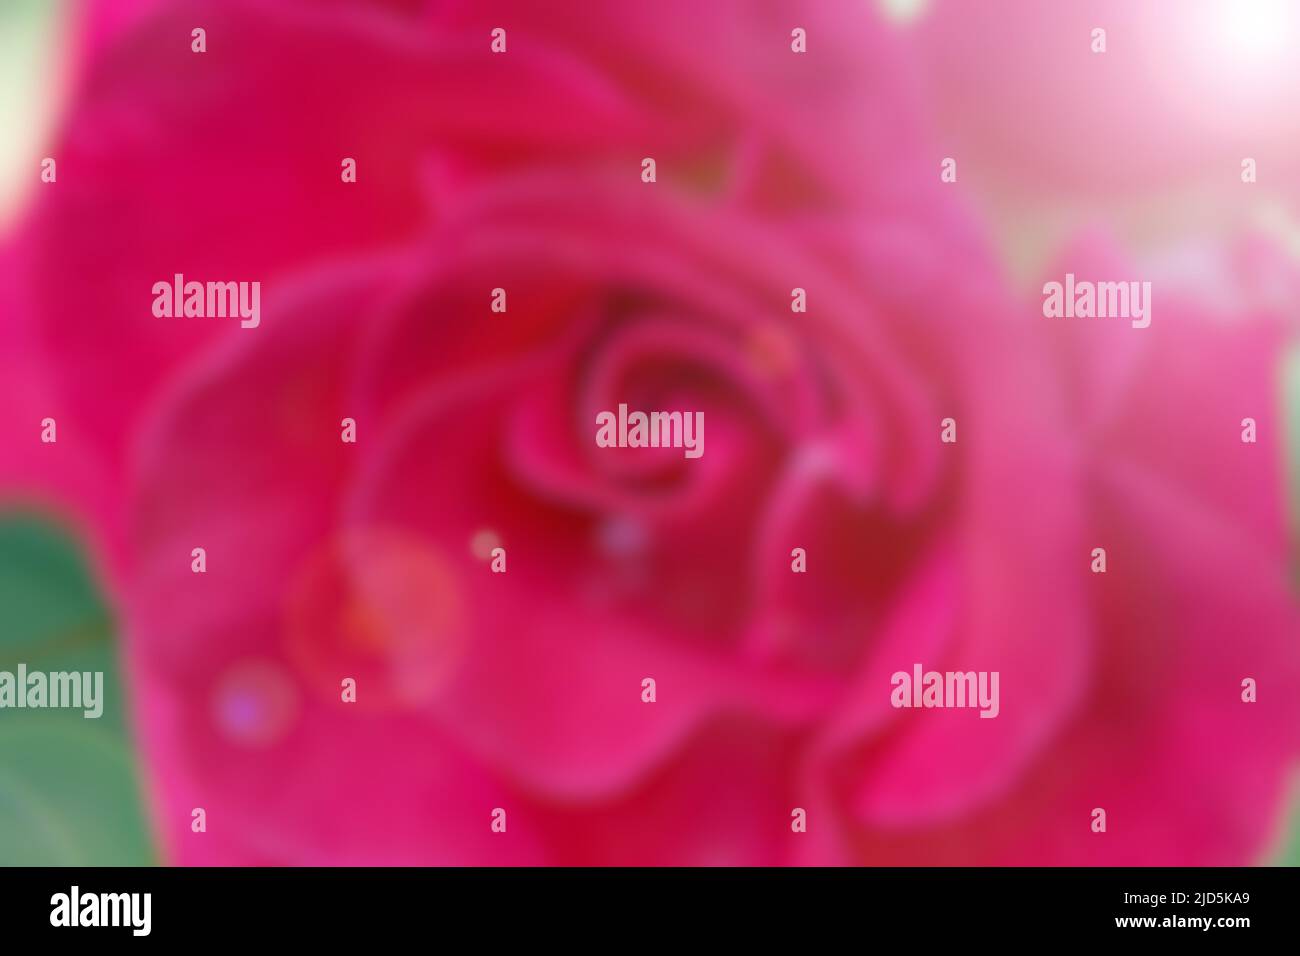 Blurred background from pink rose bud Stock Photo